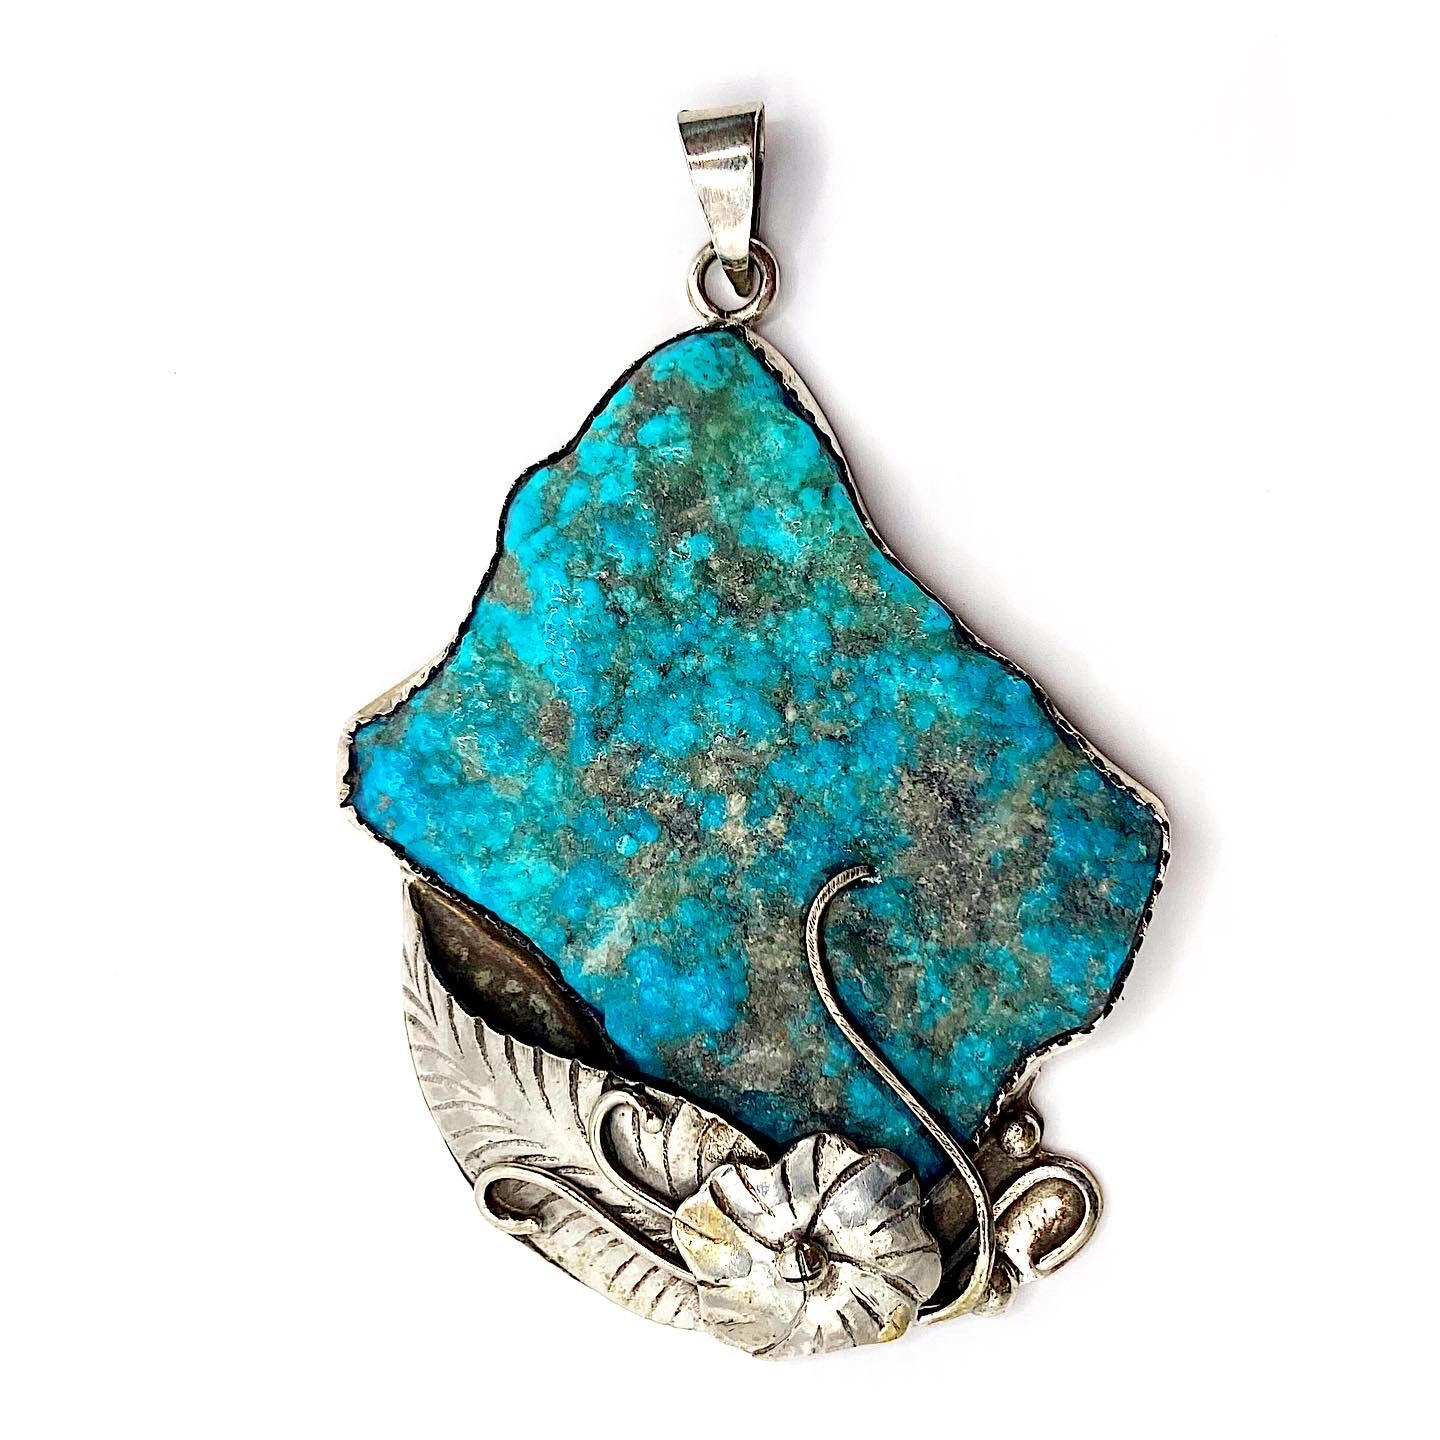 Handmade Sterling Silver925 pendant with turquoise